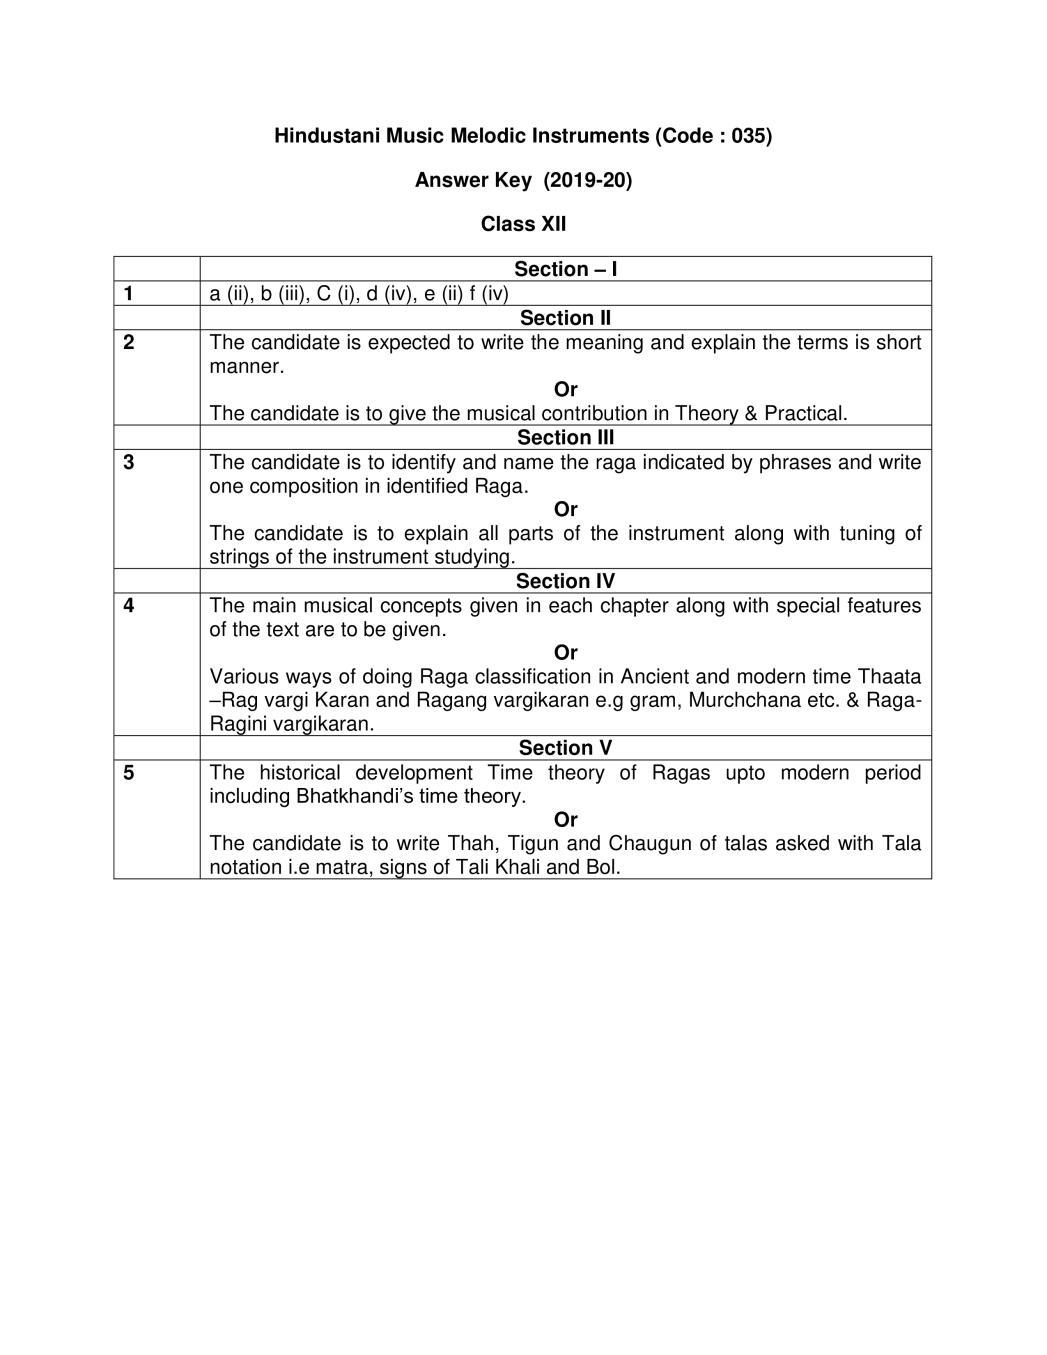 CBSE Class 12 Marking Scheme 2020 for Hindustani Music Melodic Instrument - Page 1